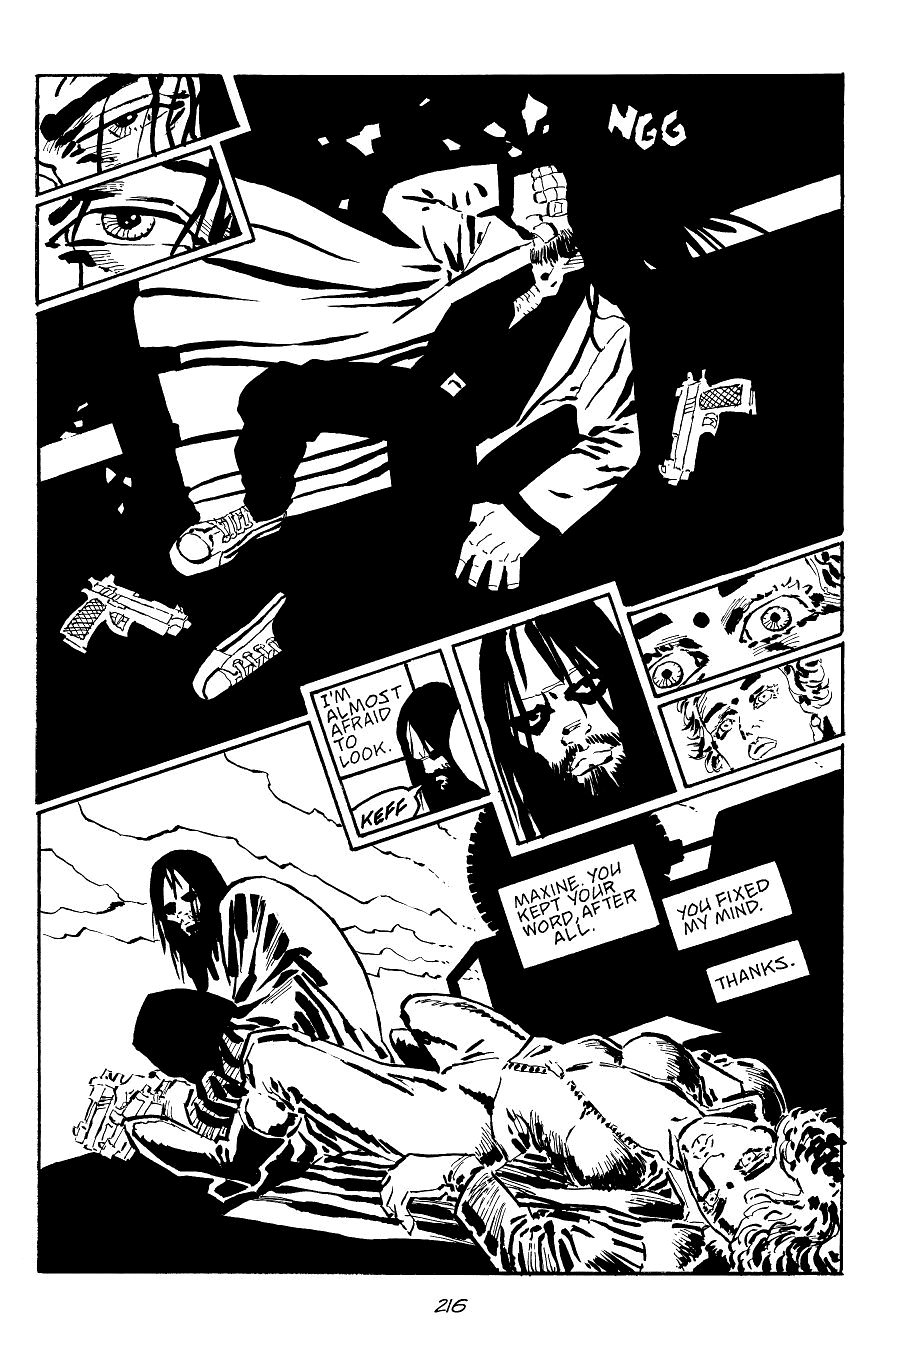 page 216 of sin city 7 hell and back